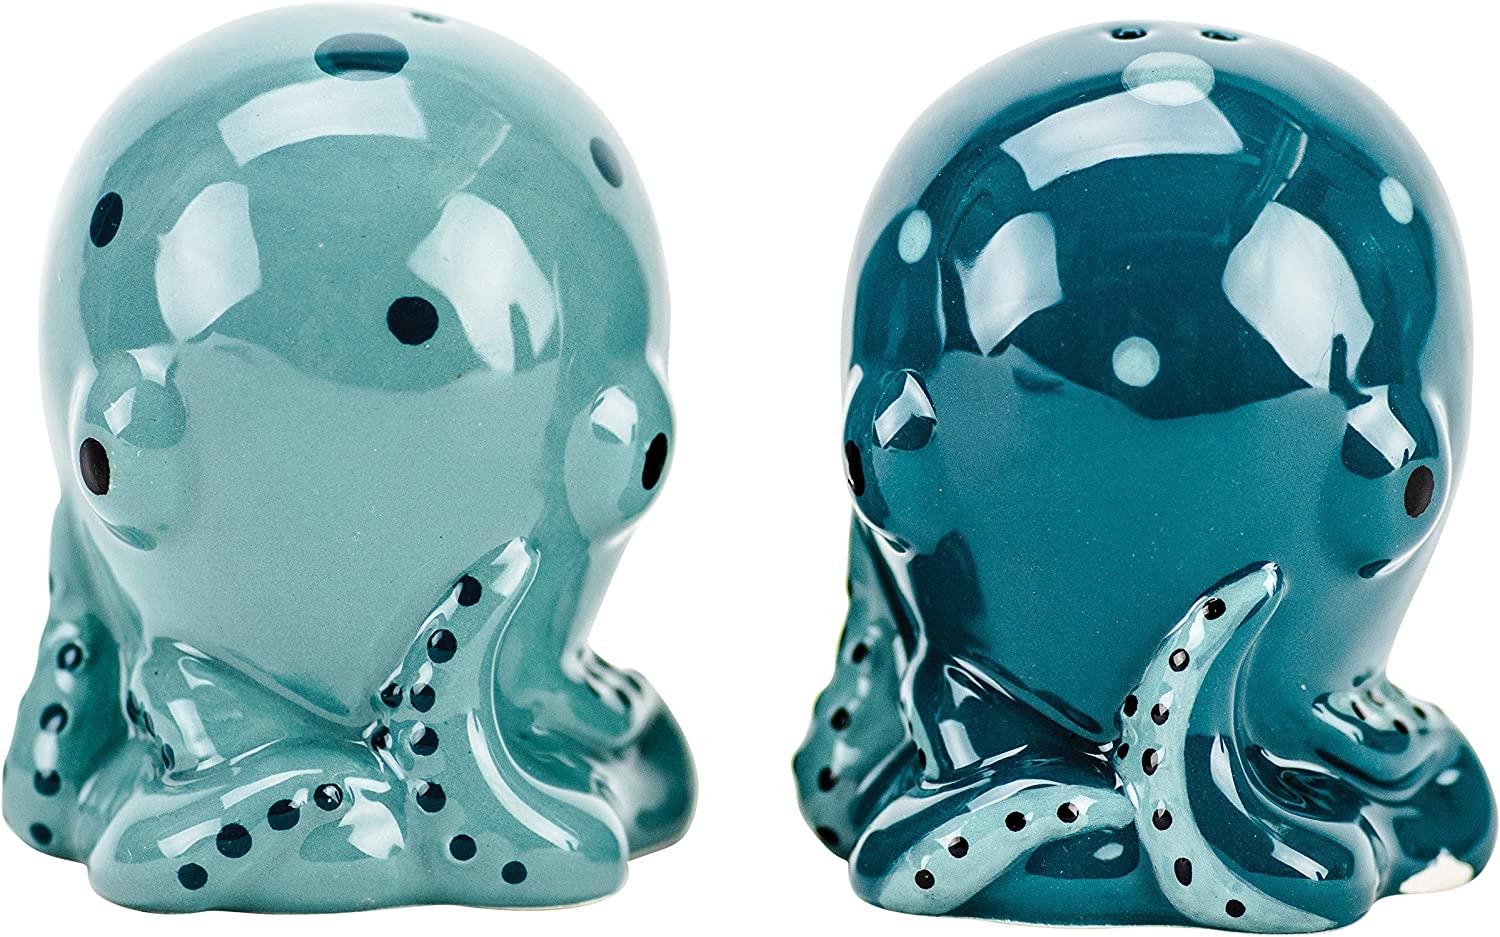 Boston Warehouse Octopus Salt & Pepper Shakers, 2-Piece Set, Blue/Teal Import To Shop ×Product customization General